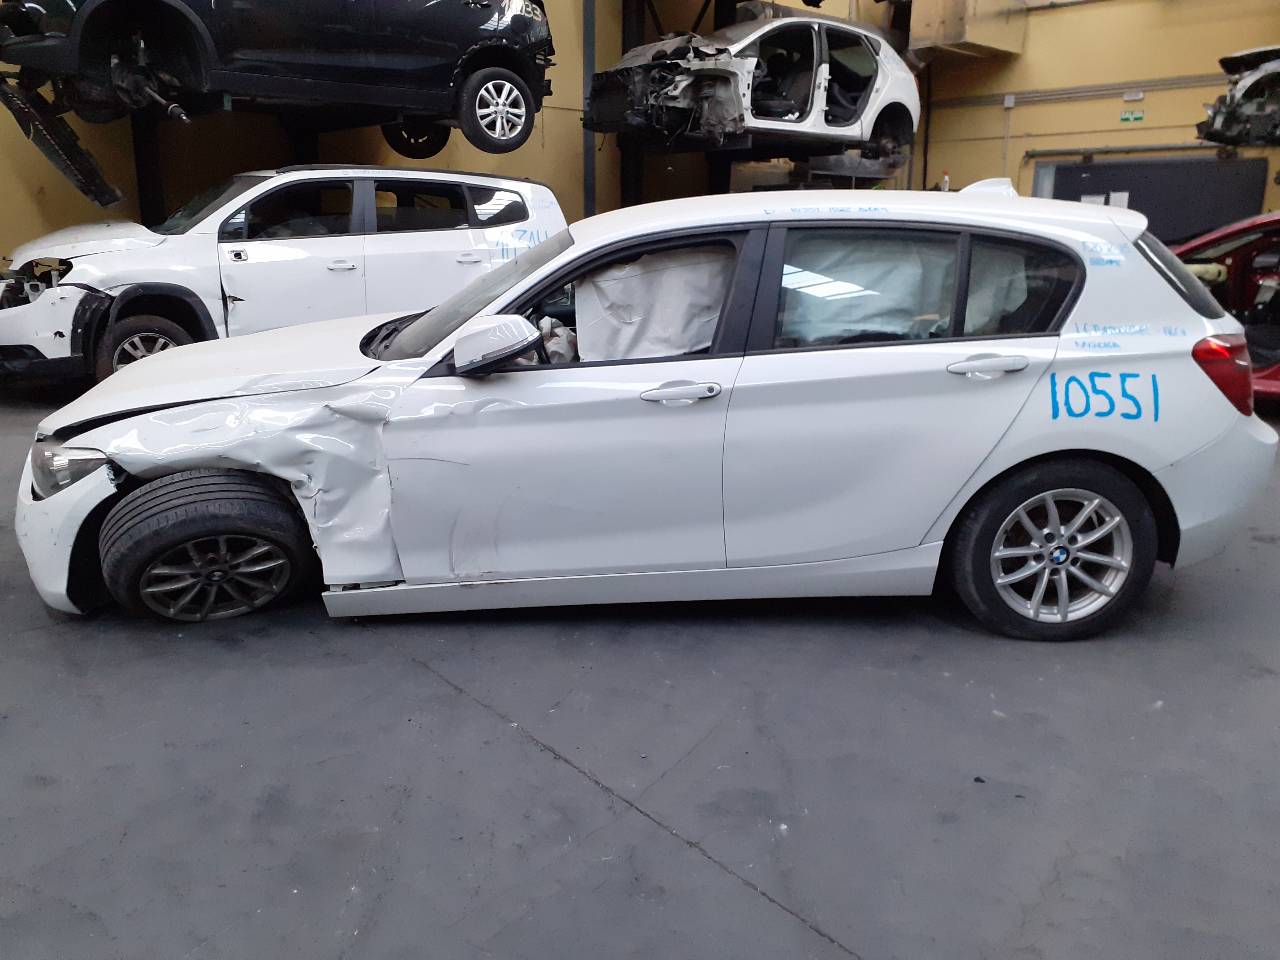 BMW 1 Series F20/F21 (2011-2020) Other Interior Parts 42921949404, E3-A2-25-1 21798715